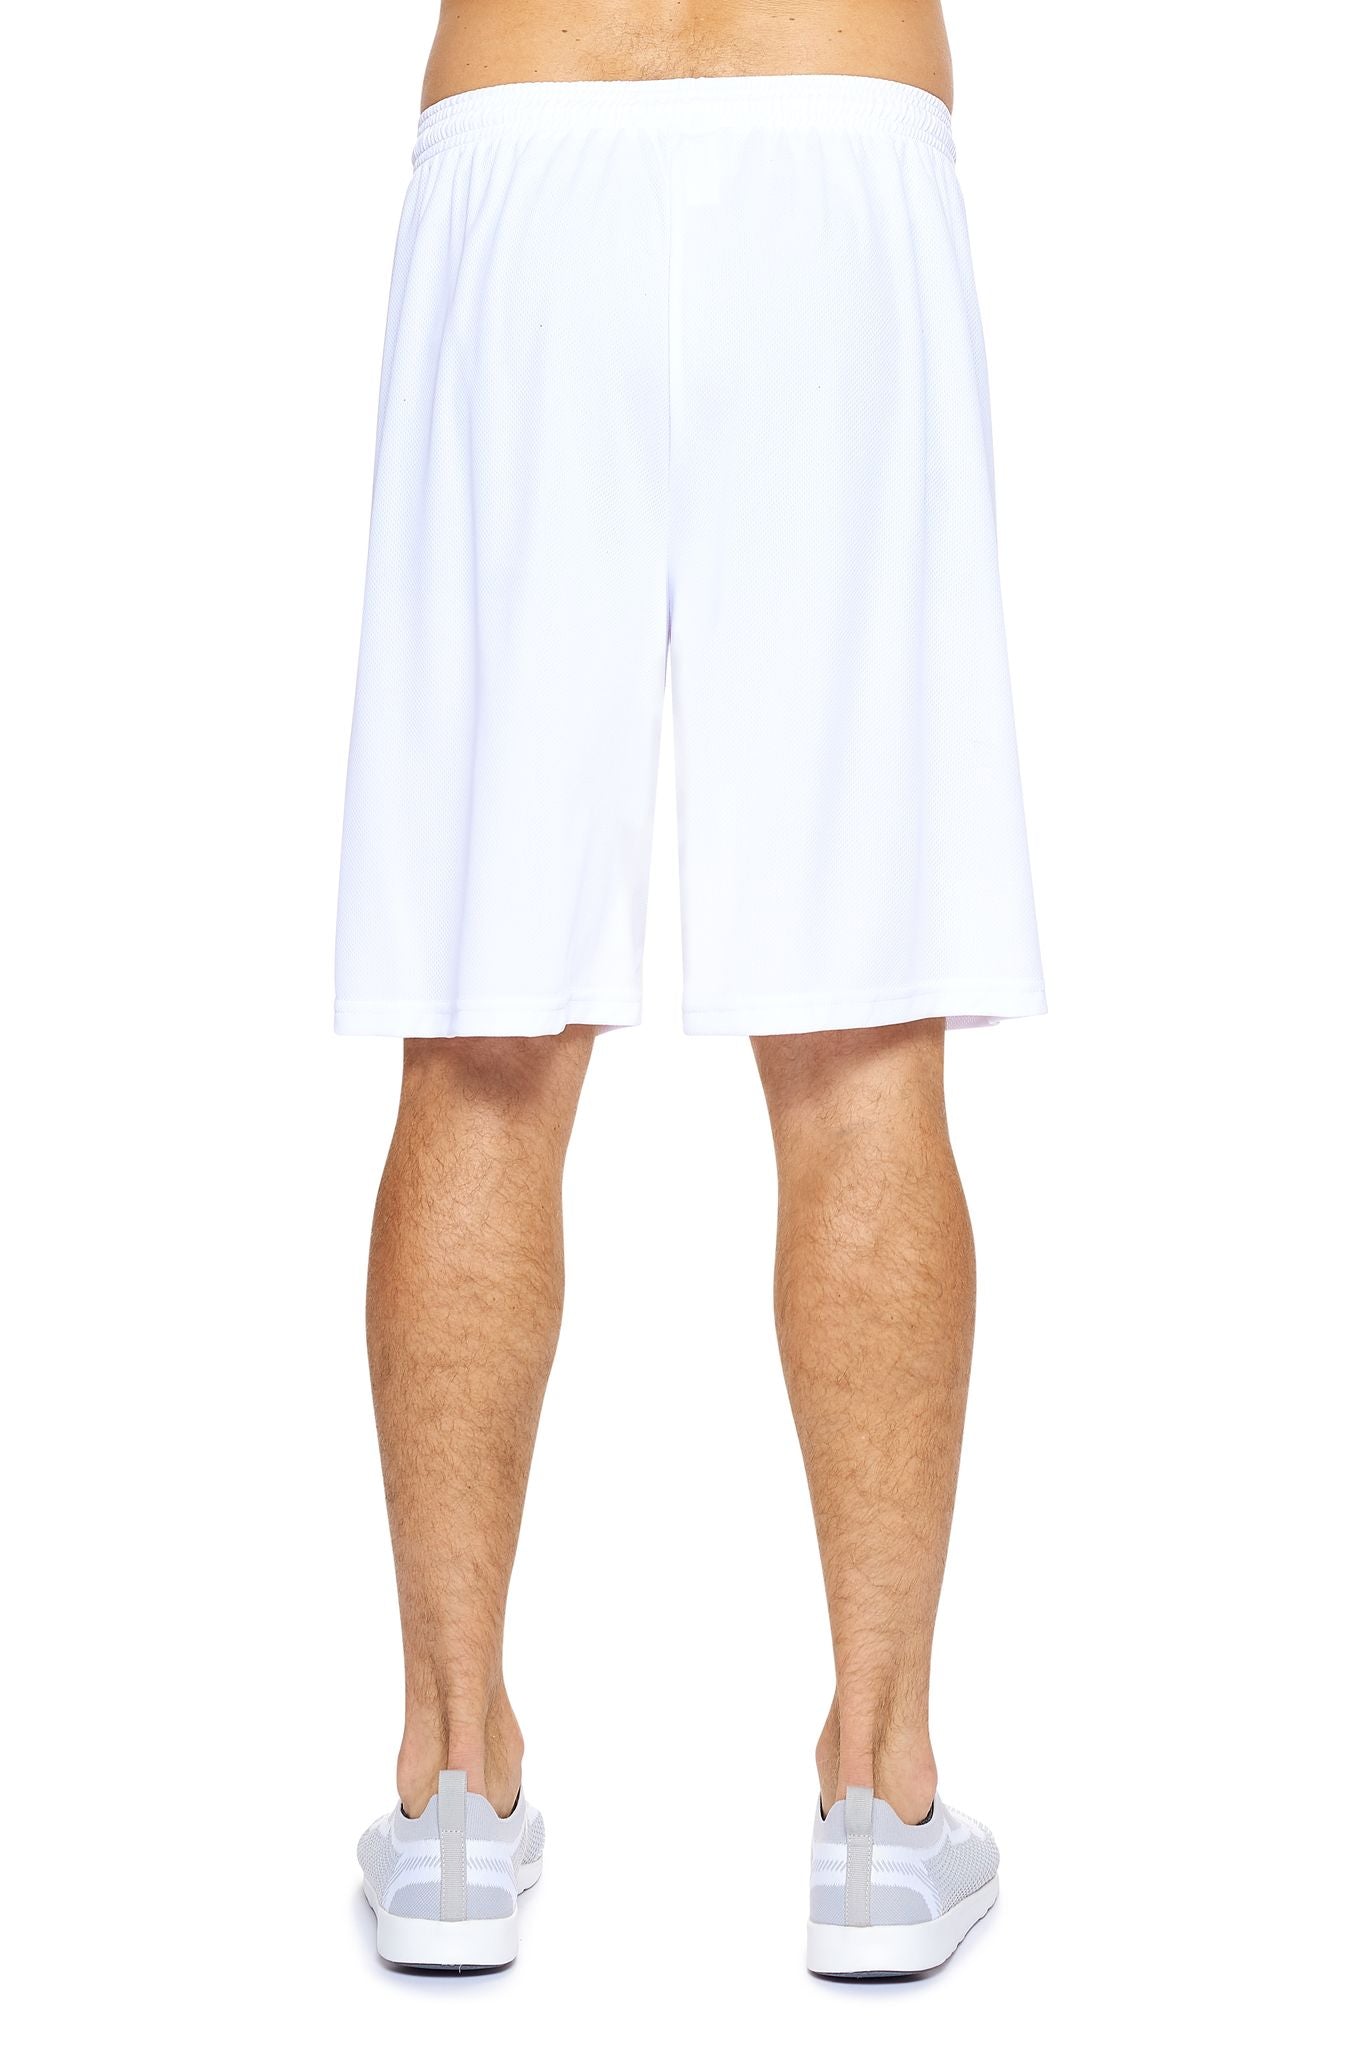 Expert Apparel Men's Oxymesh™ Training Shorts in White#color_white